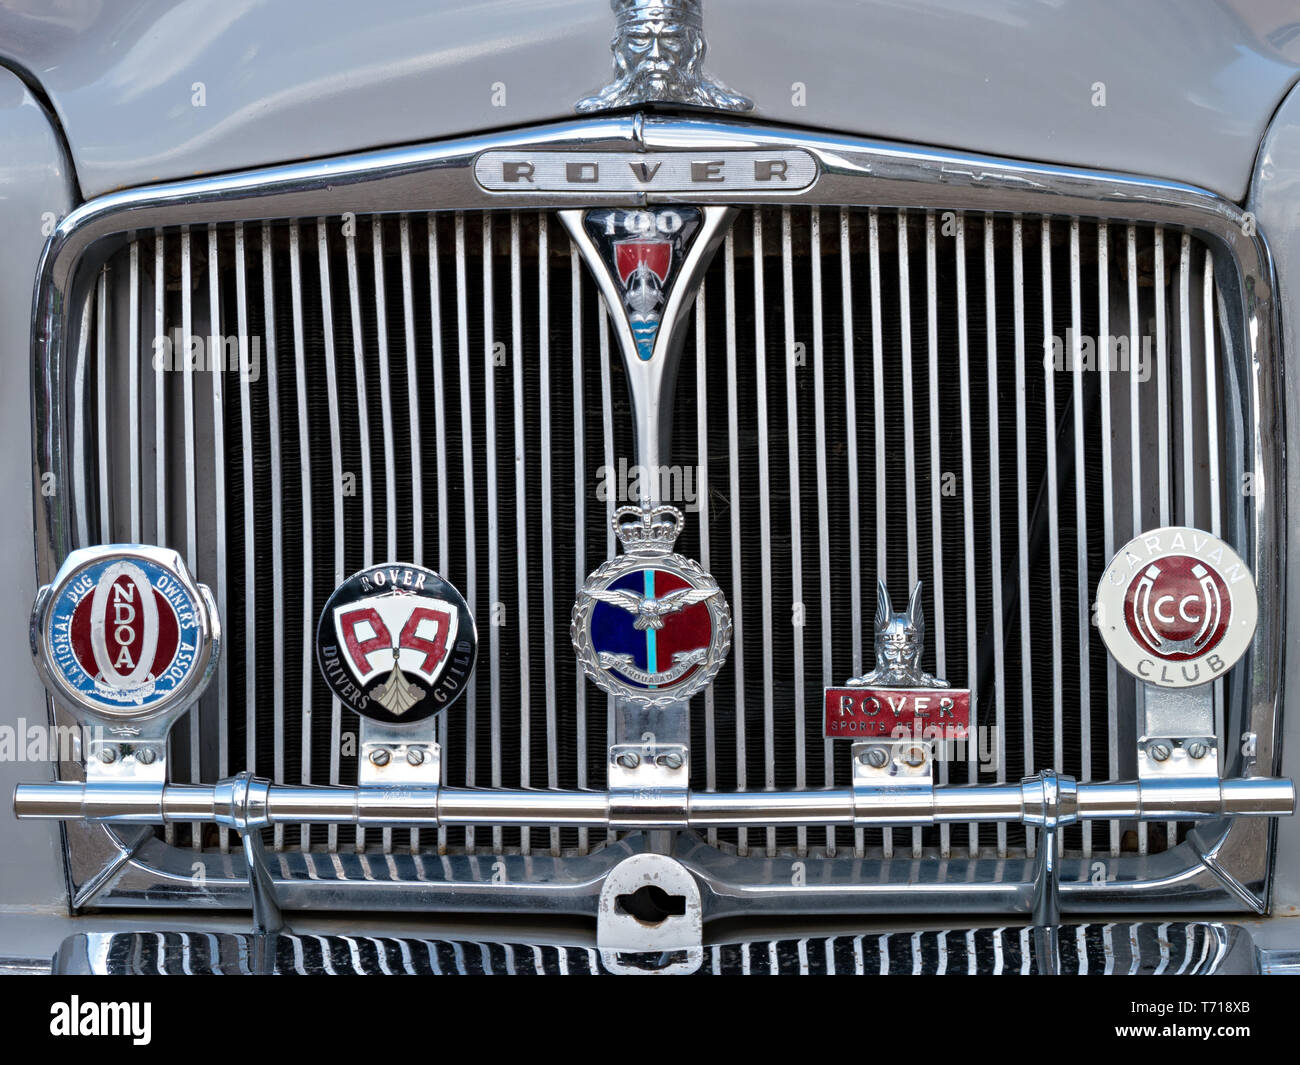 Rover P4 100 Classic Vintage Car showing detail of front radiator grille and club badges, England, UK Stock Photo